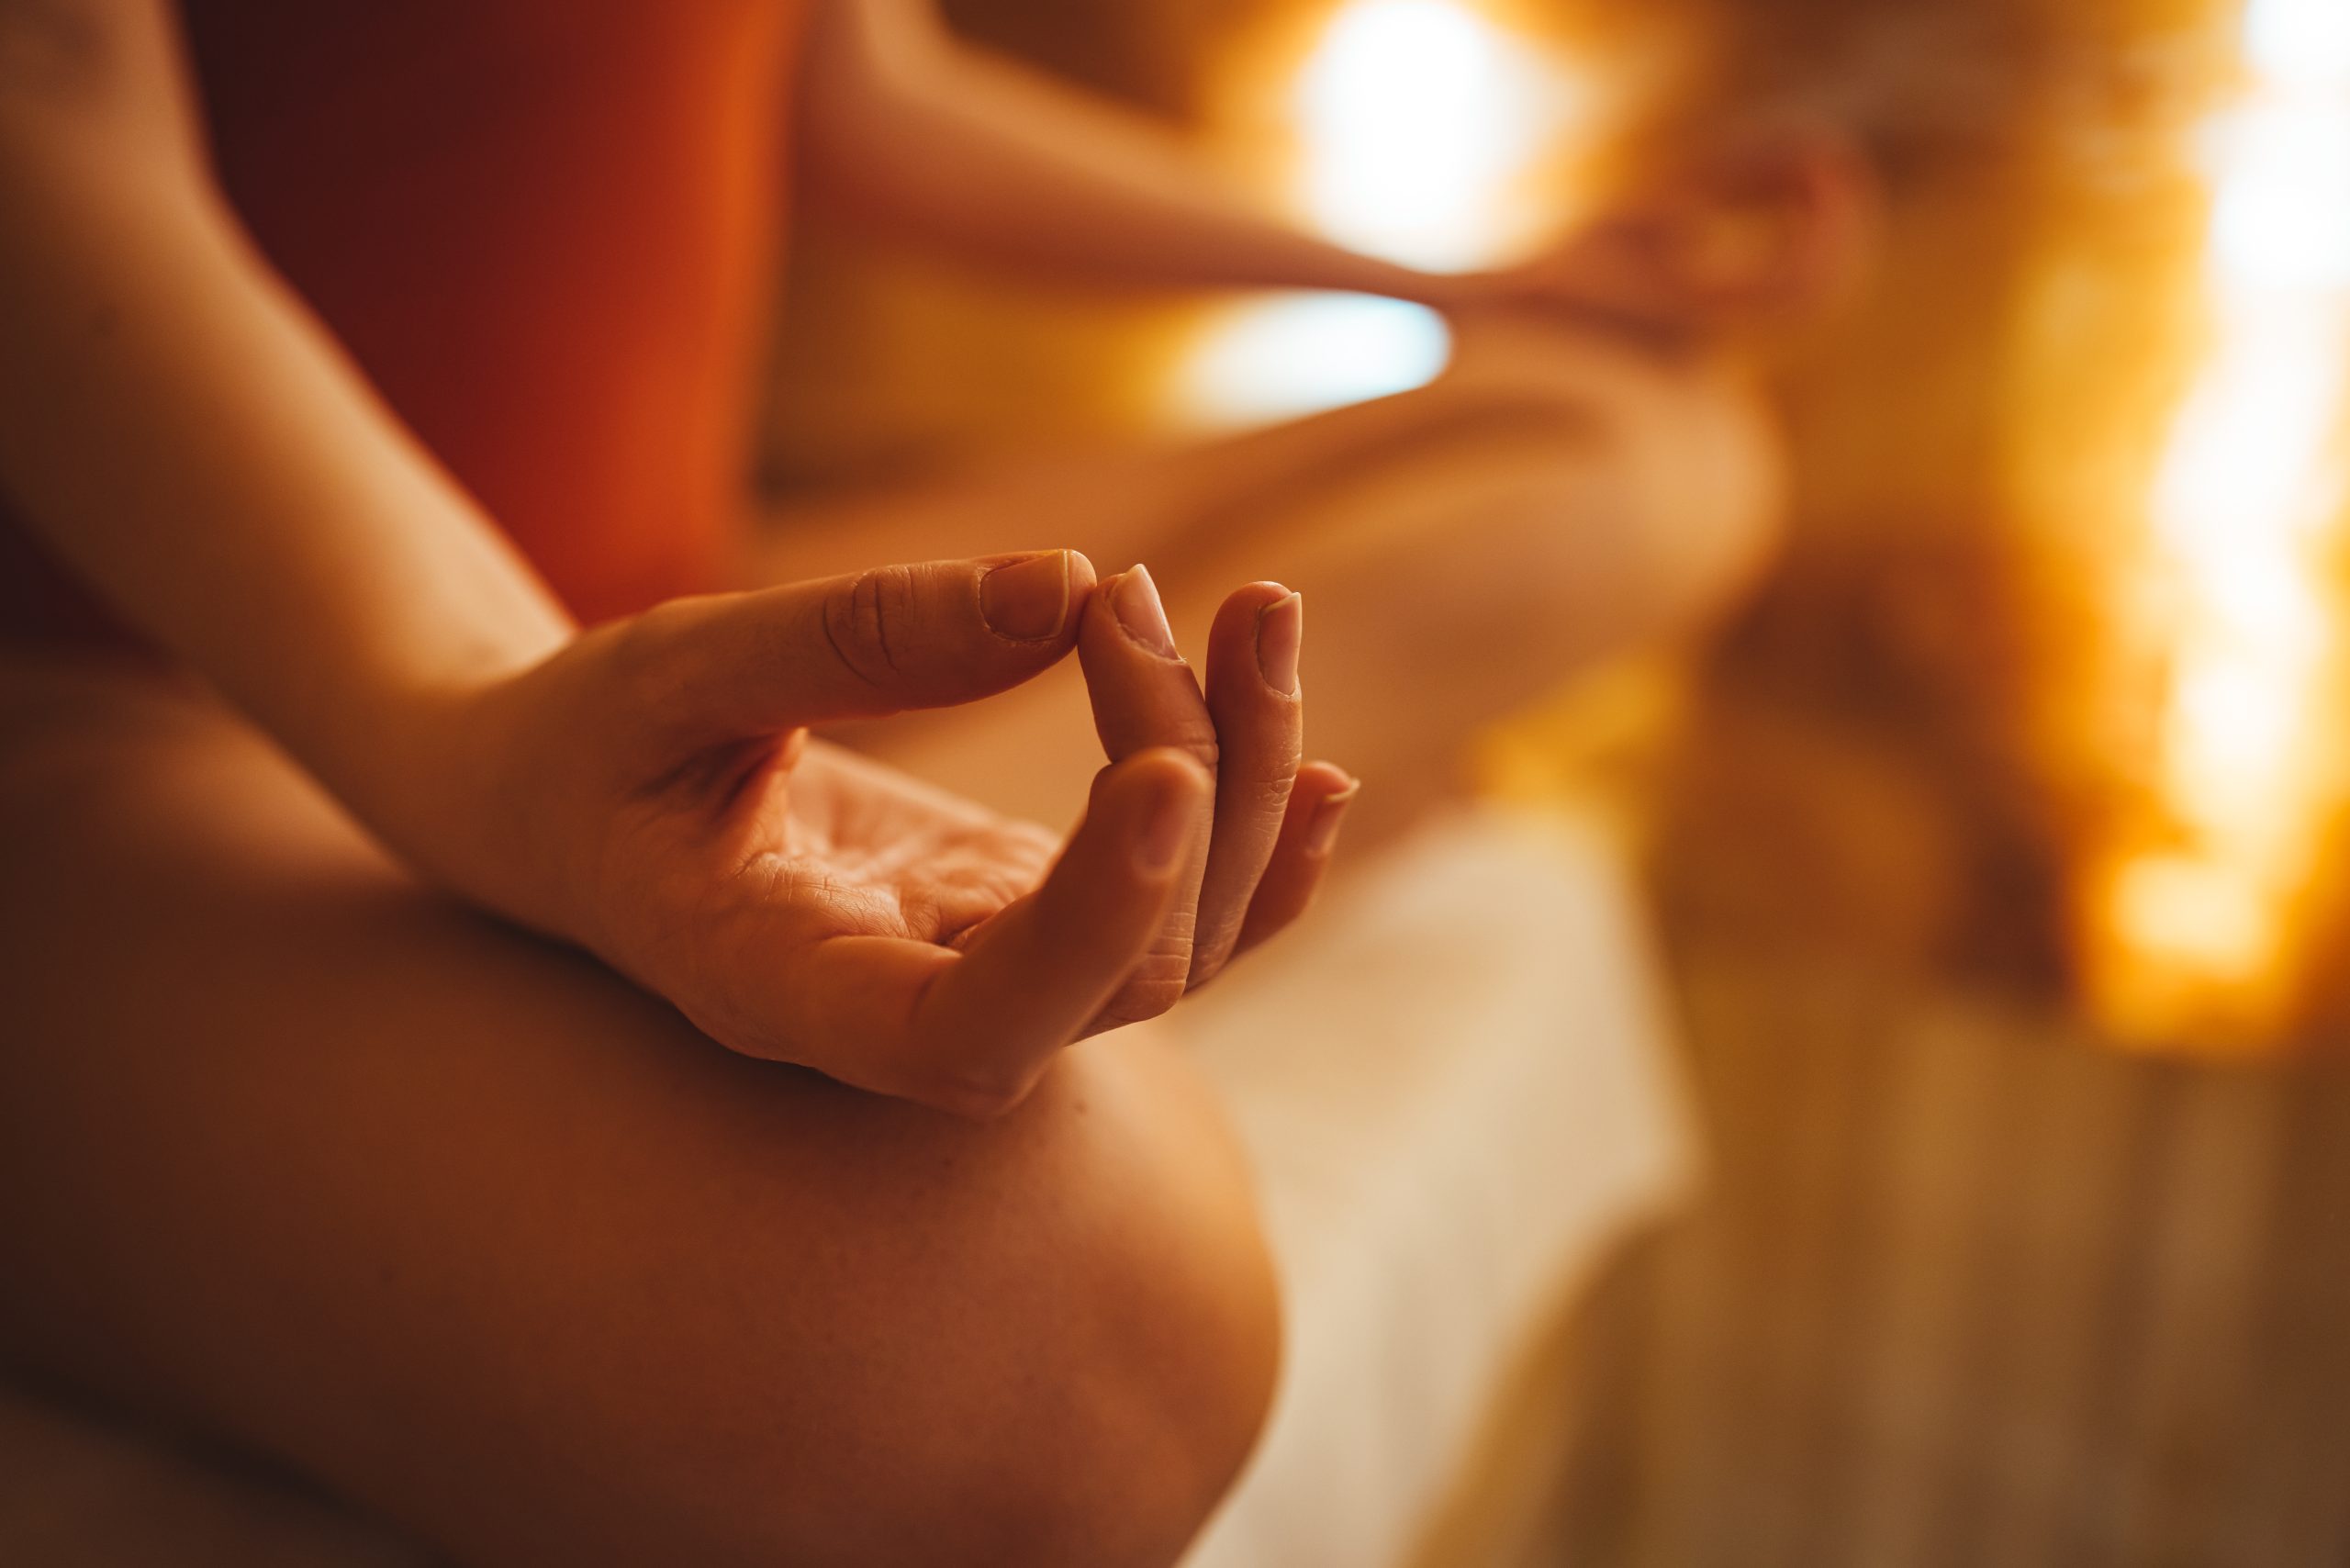 Meditate while you unwind in our wellness rooms